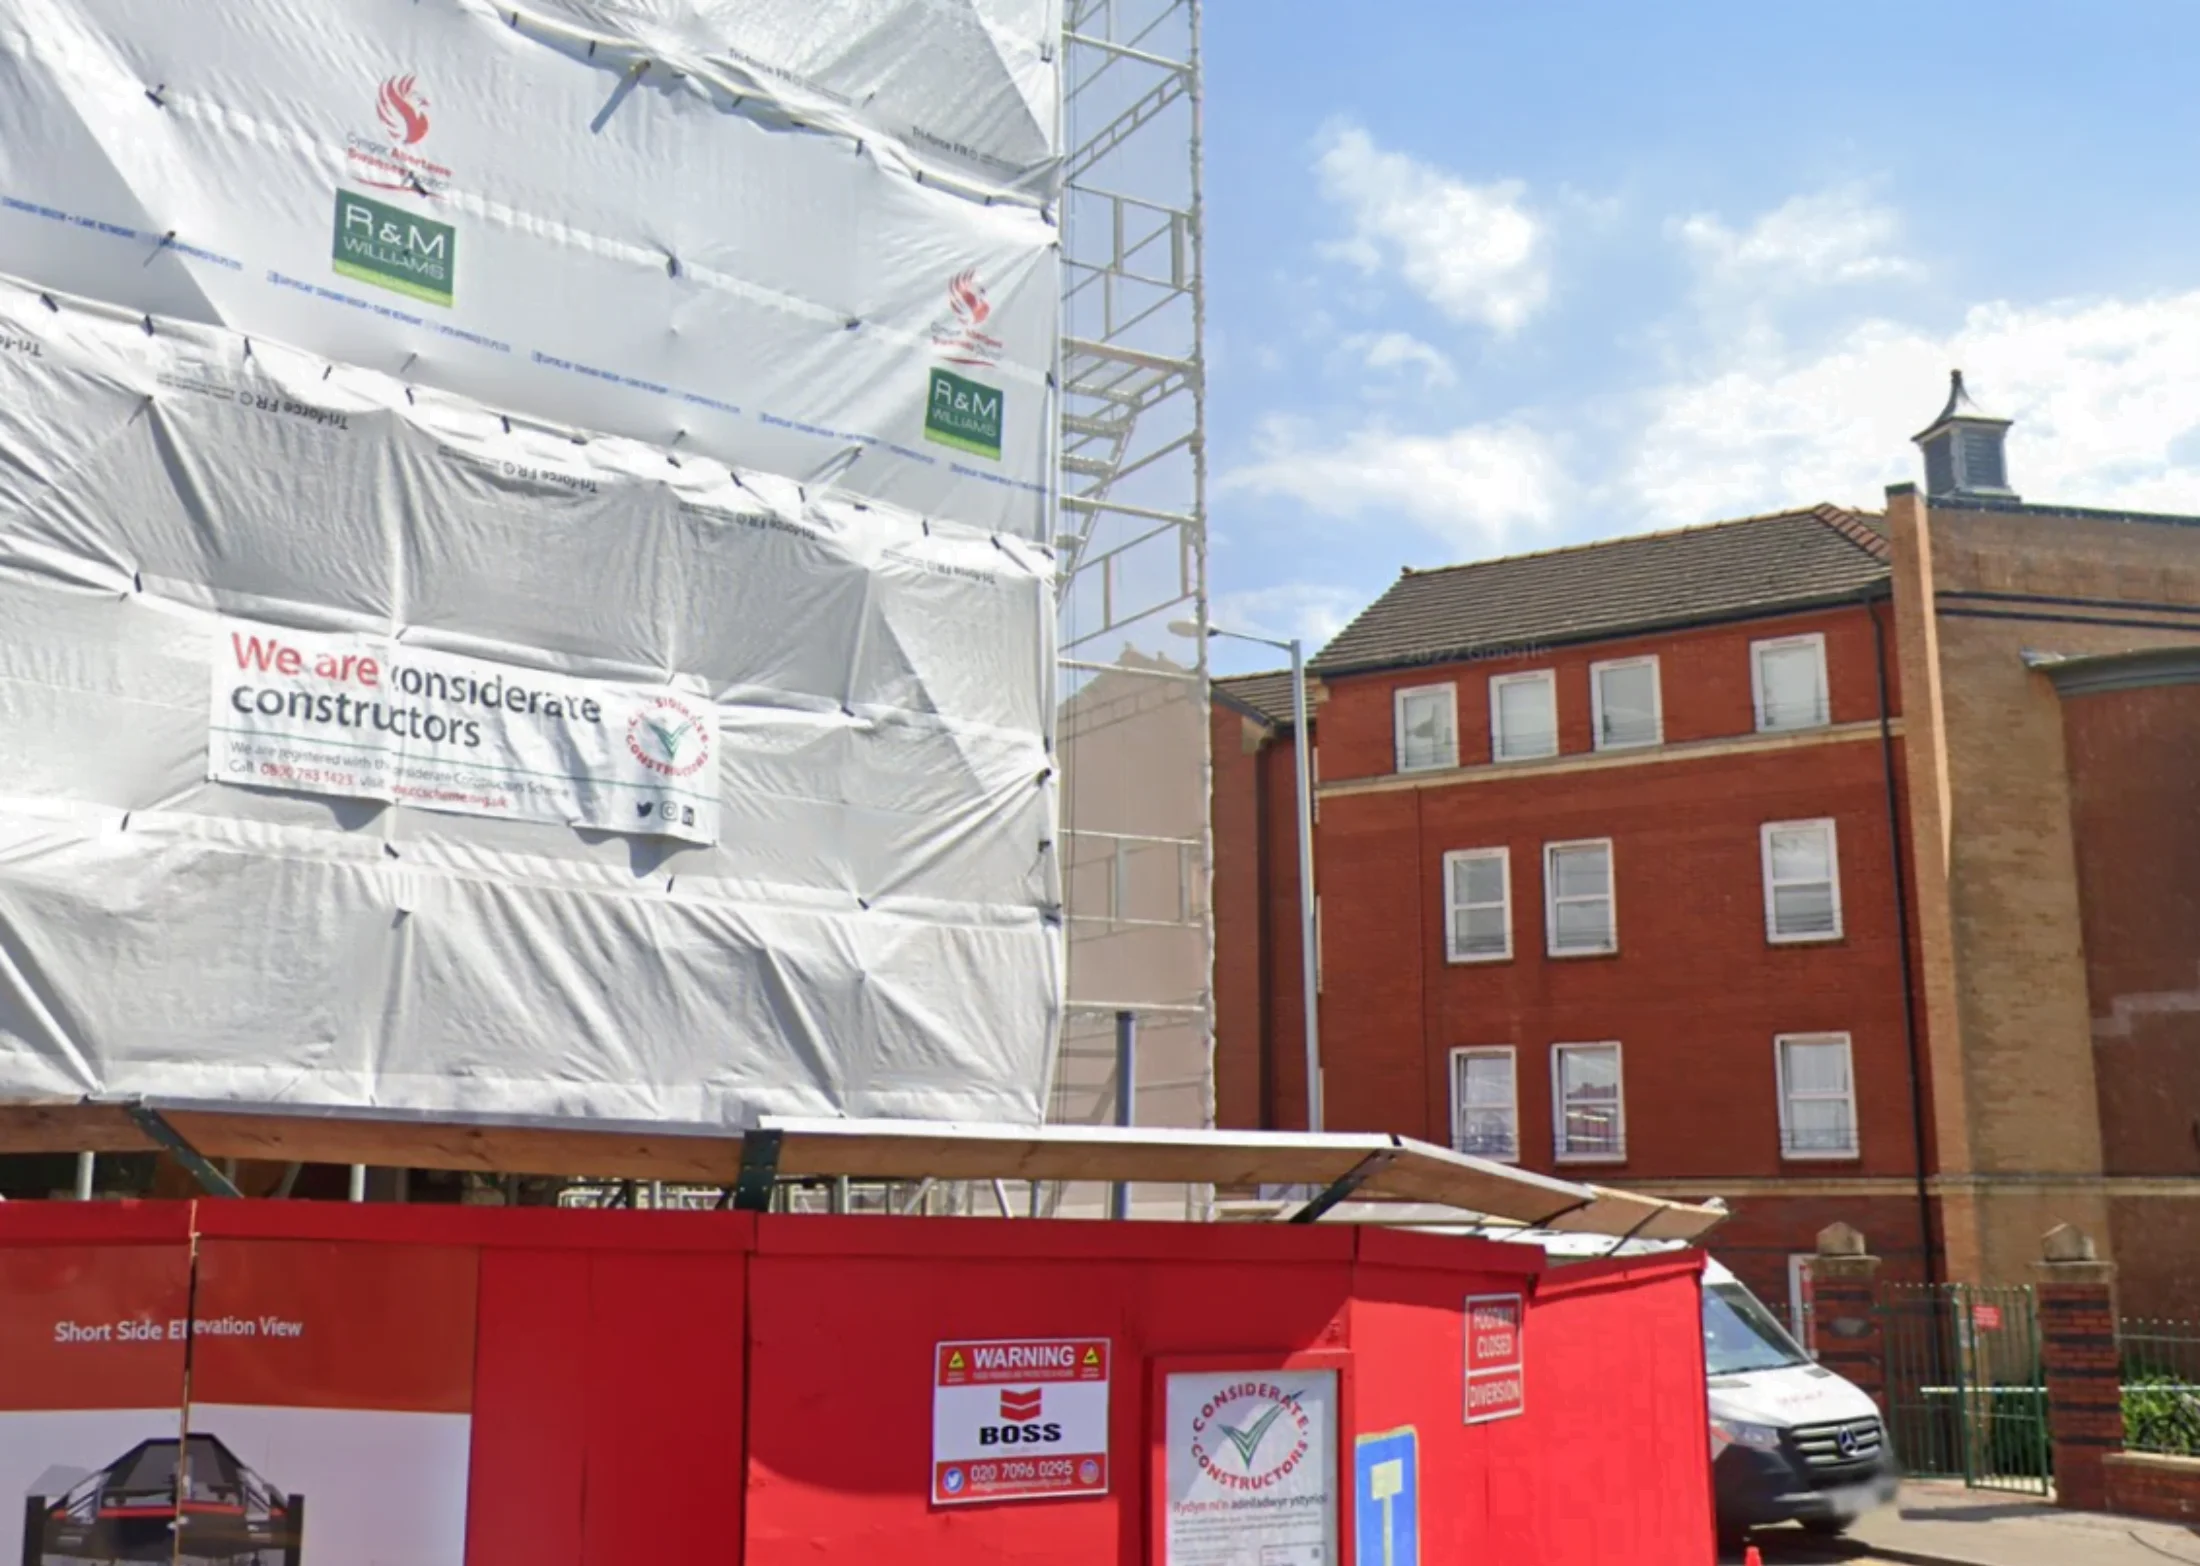 Palace Theatre site rated ‘excellent’ after Considerate Constructor inspection